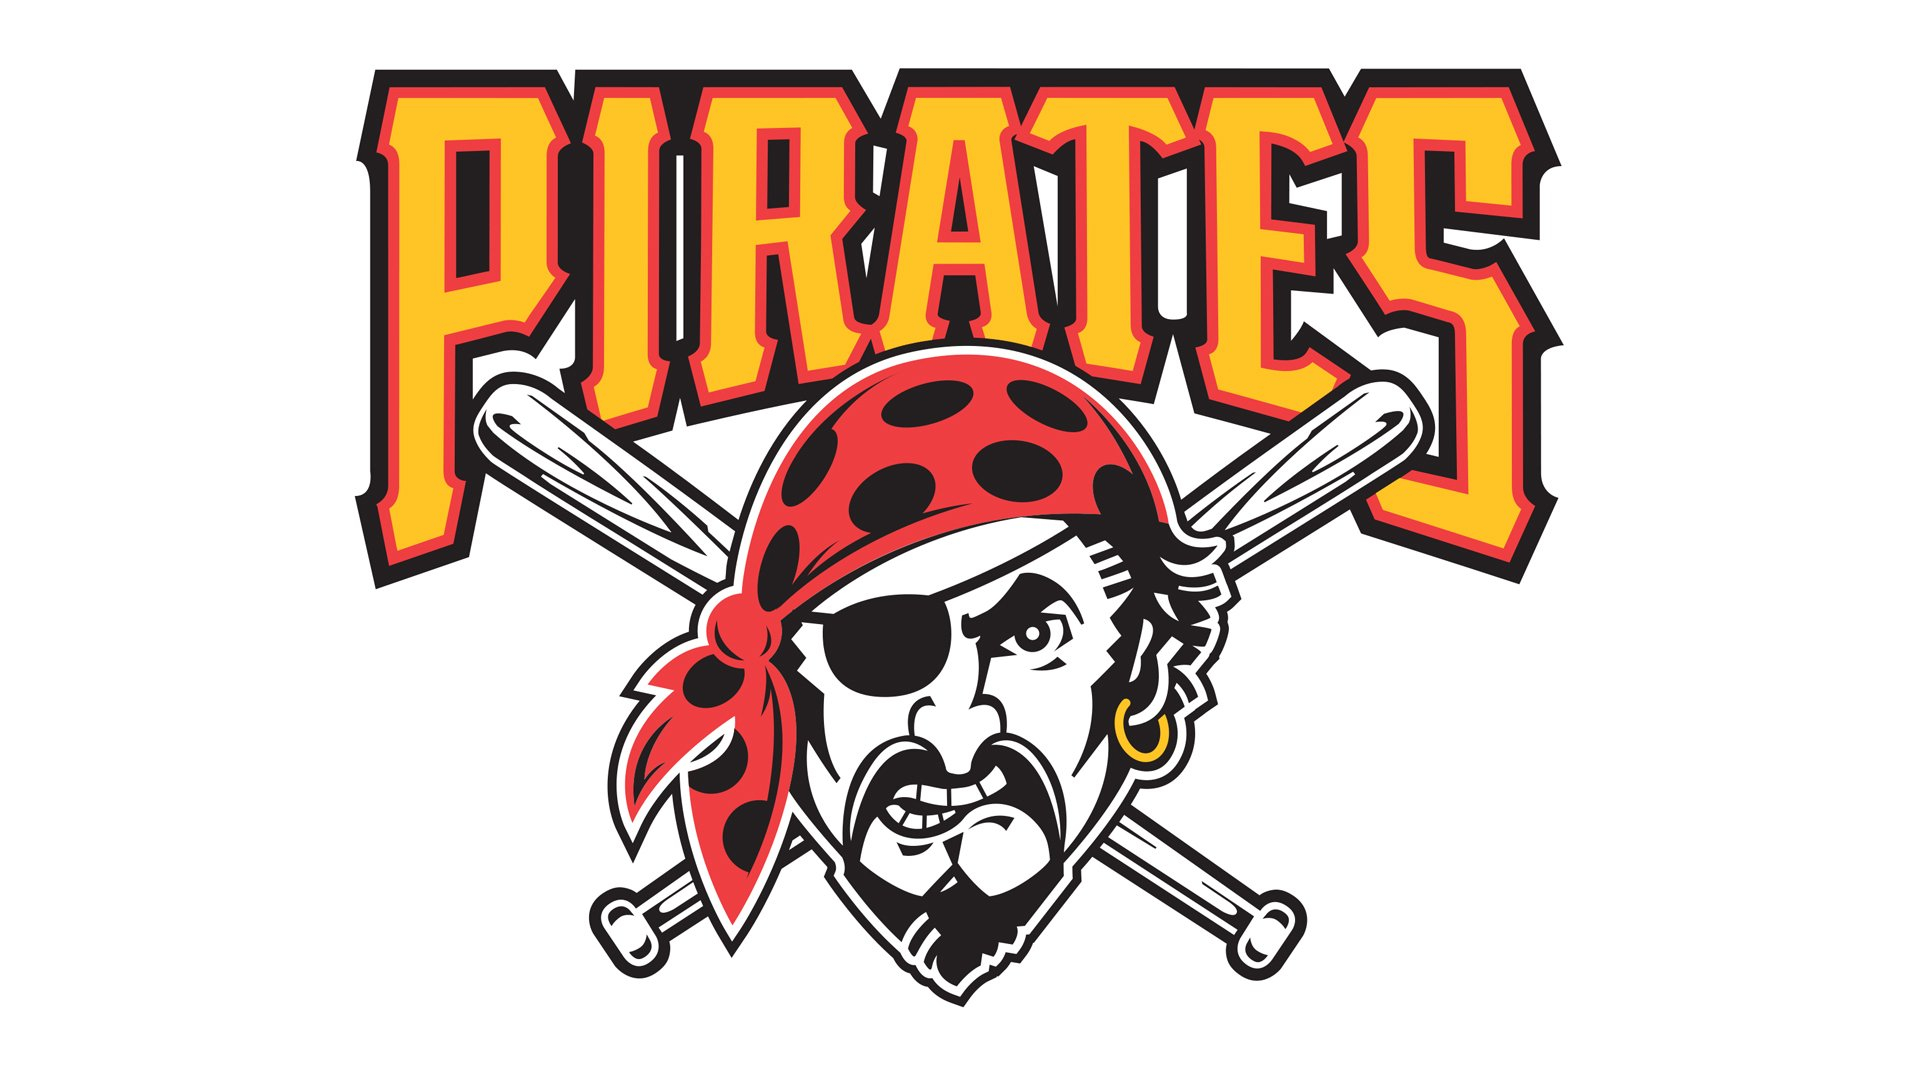 1920x1080 Pittsburgh Pirates logo and symbol, meaning, history, PNG